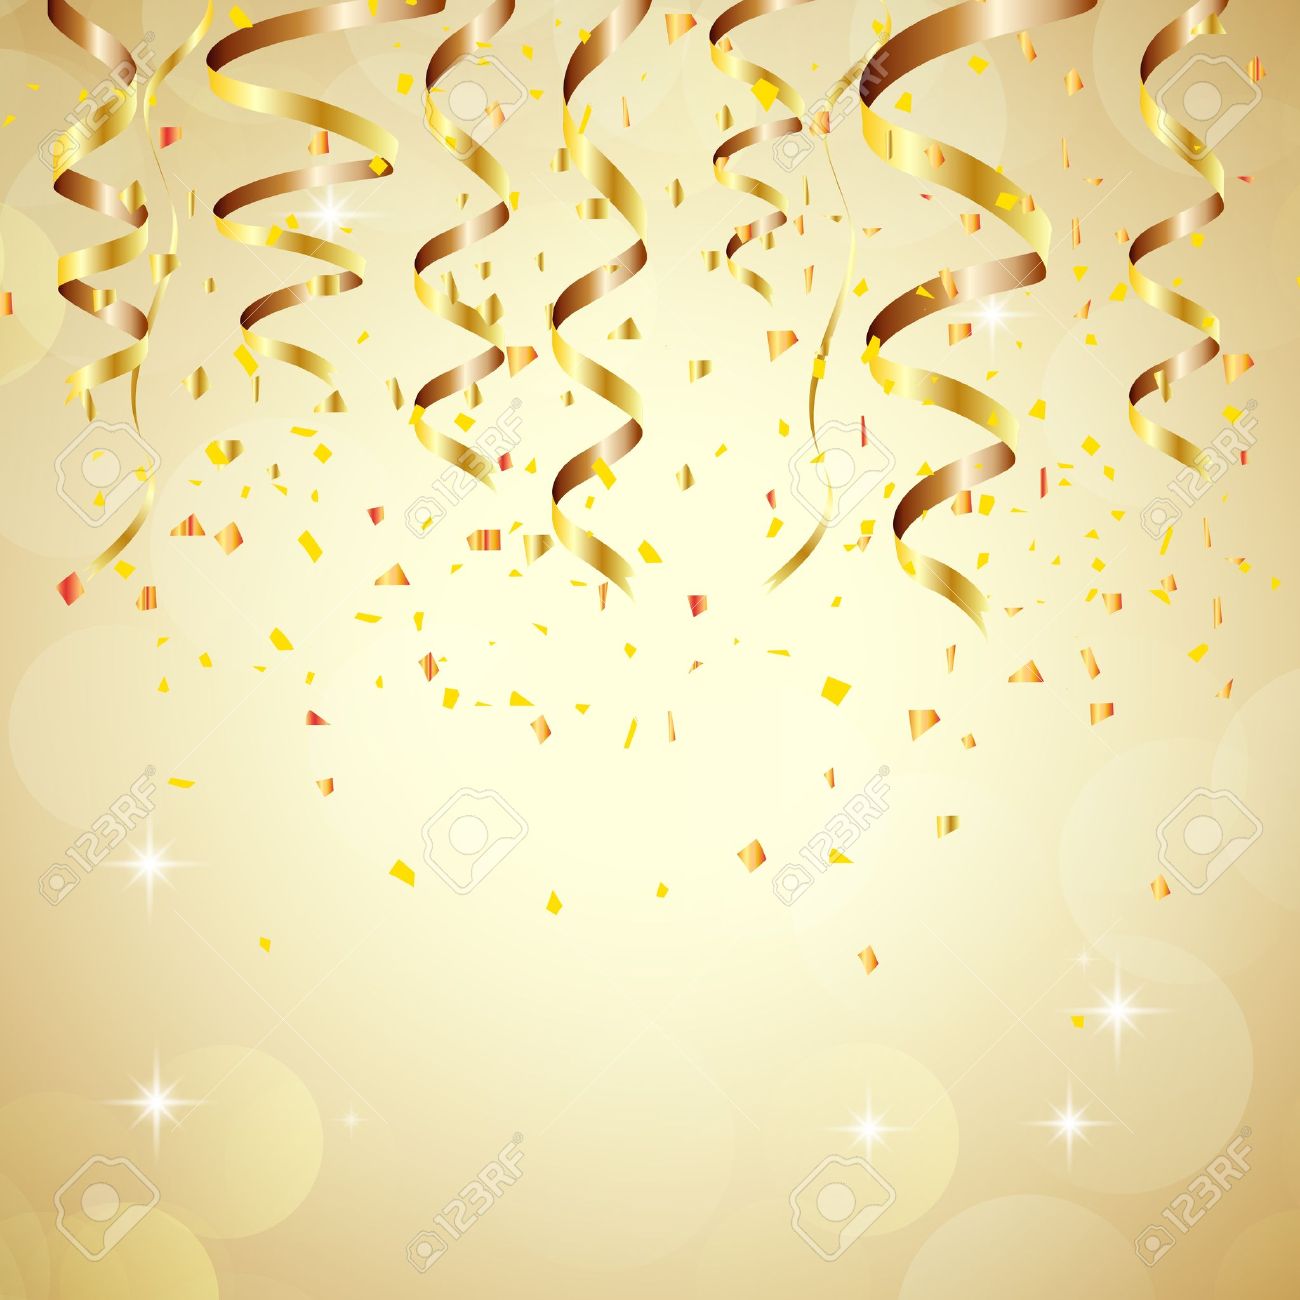 Happy New Year Background With Golden Confetti Royalty